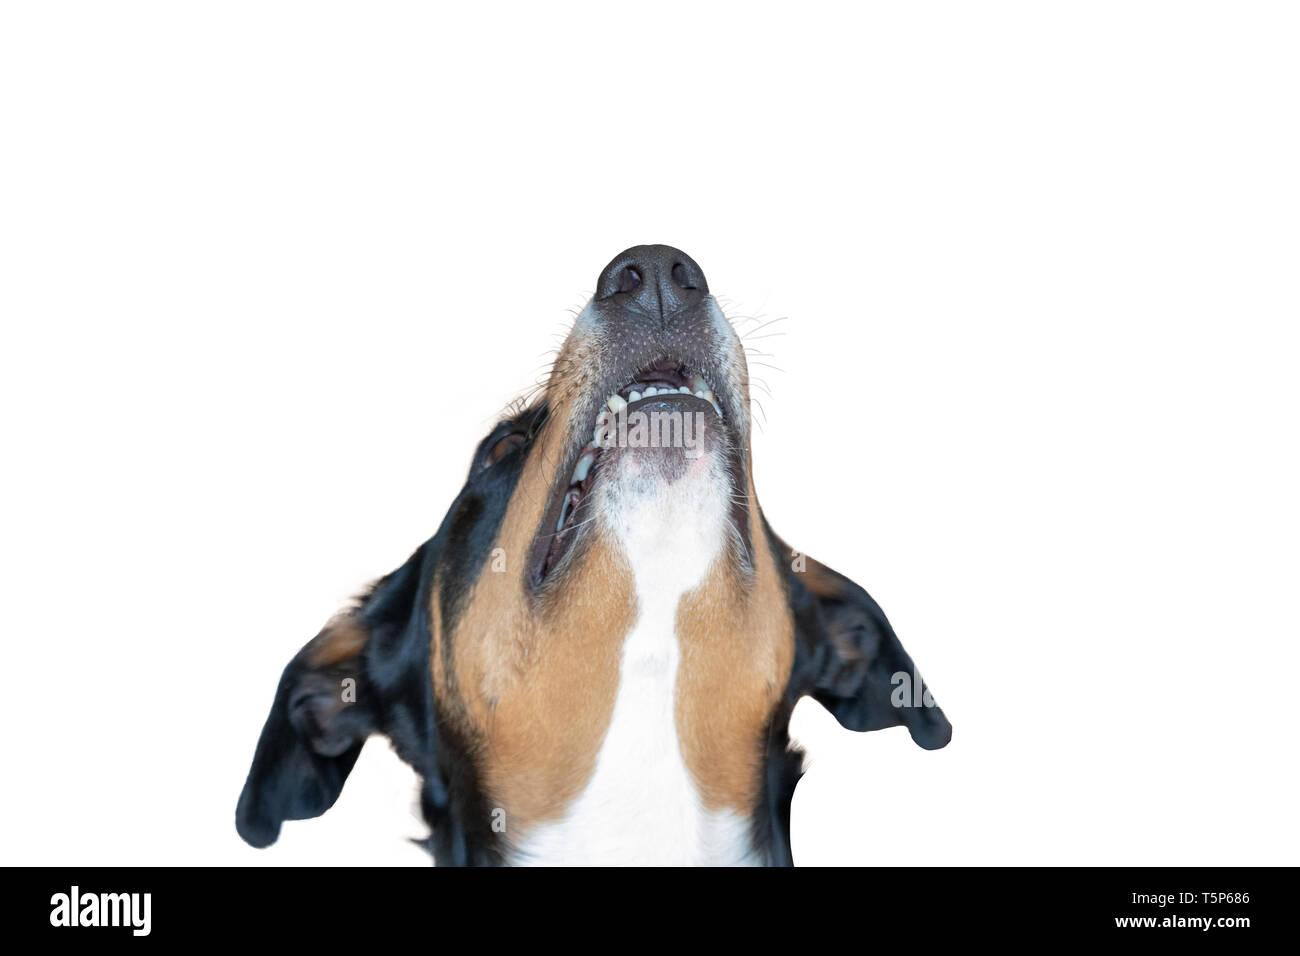 L'Appenzeller Mountain Dog looking up against a white background Banque D'Images